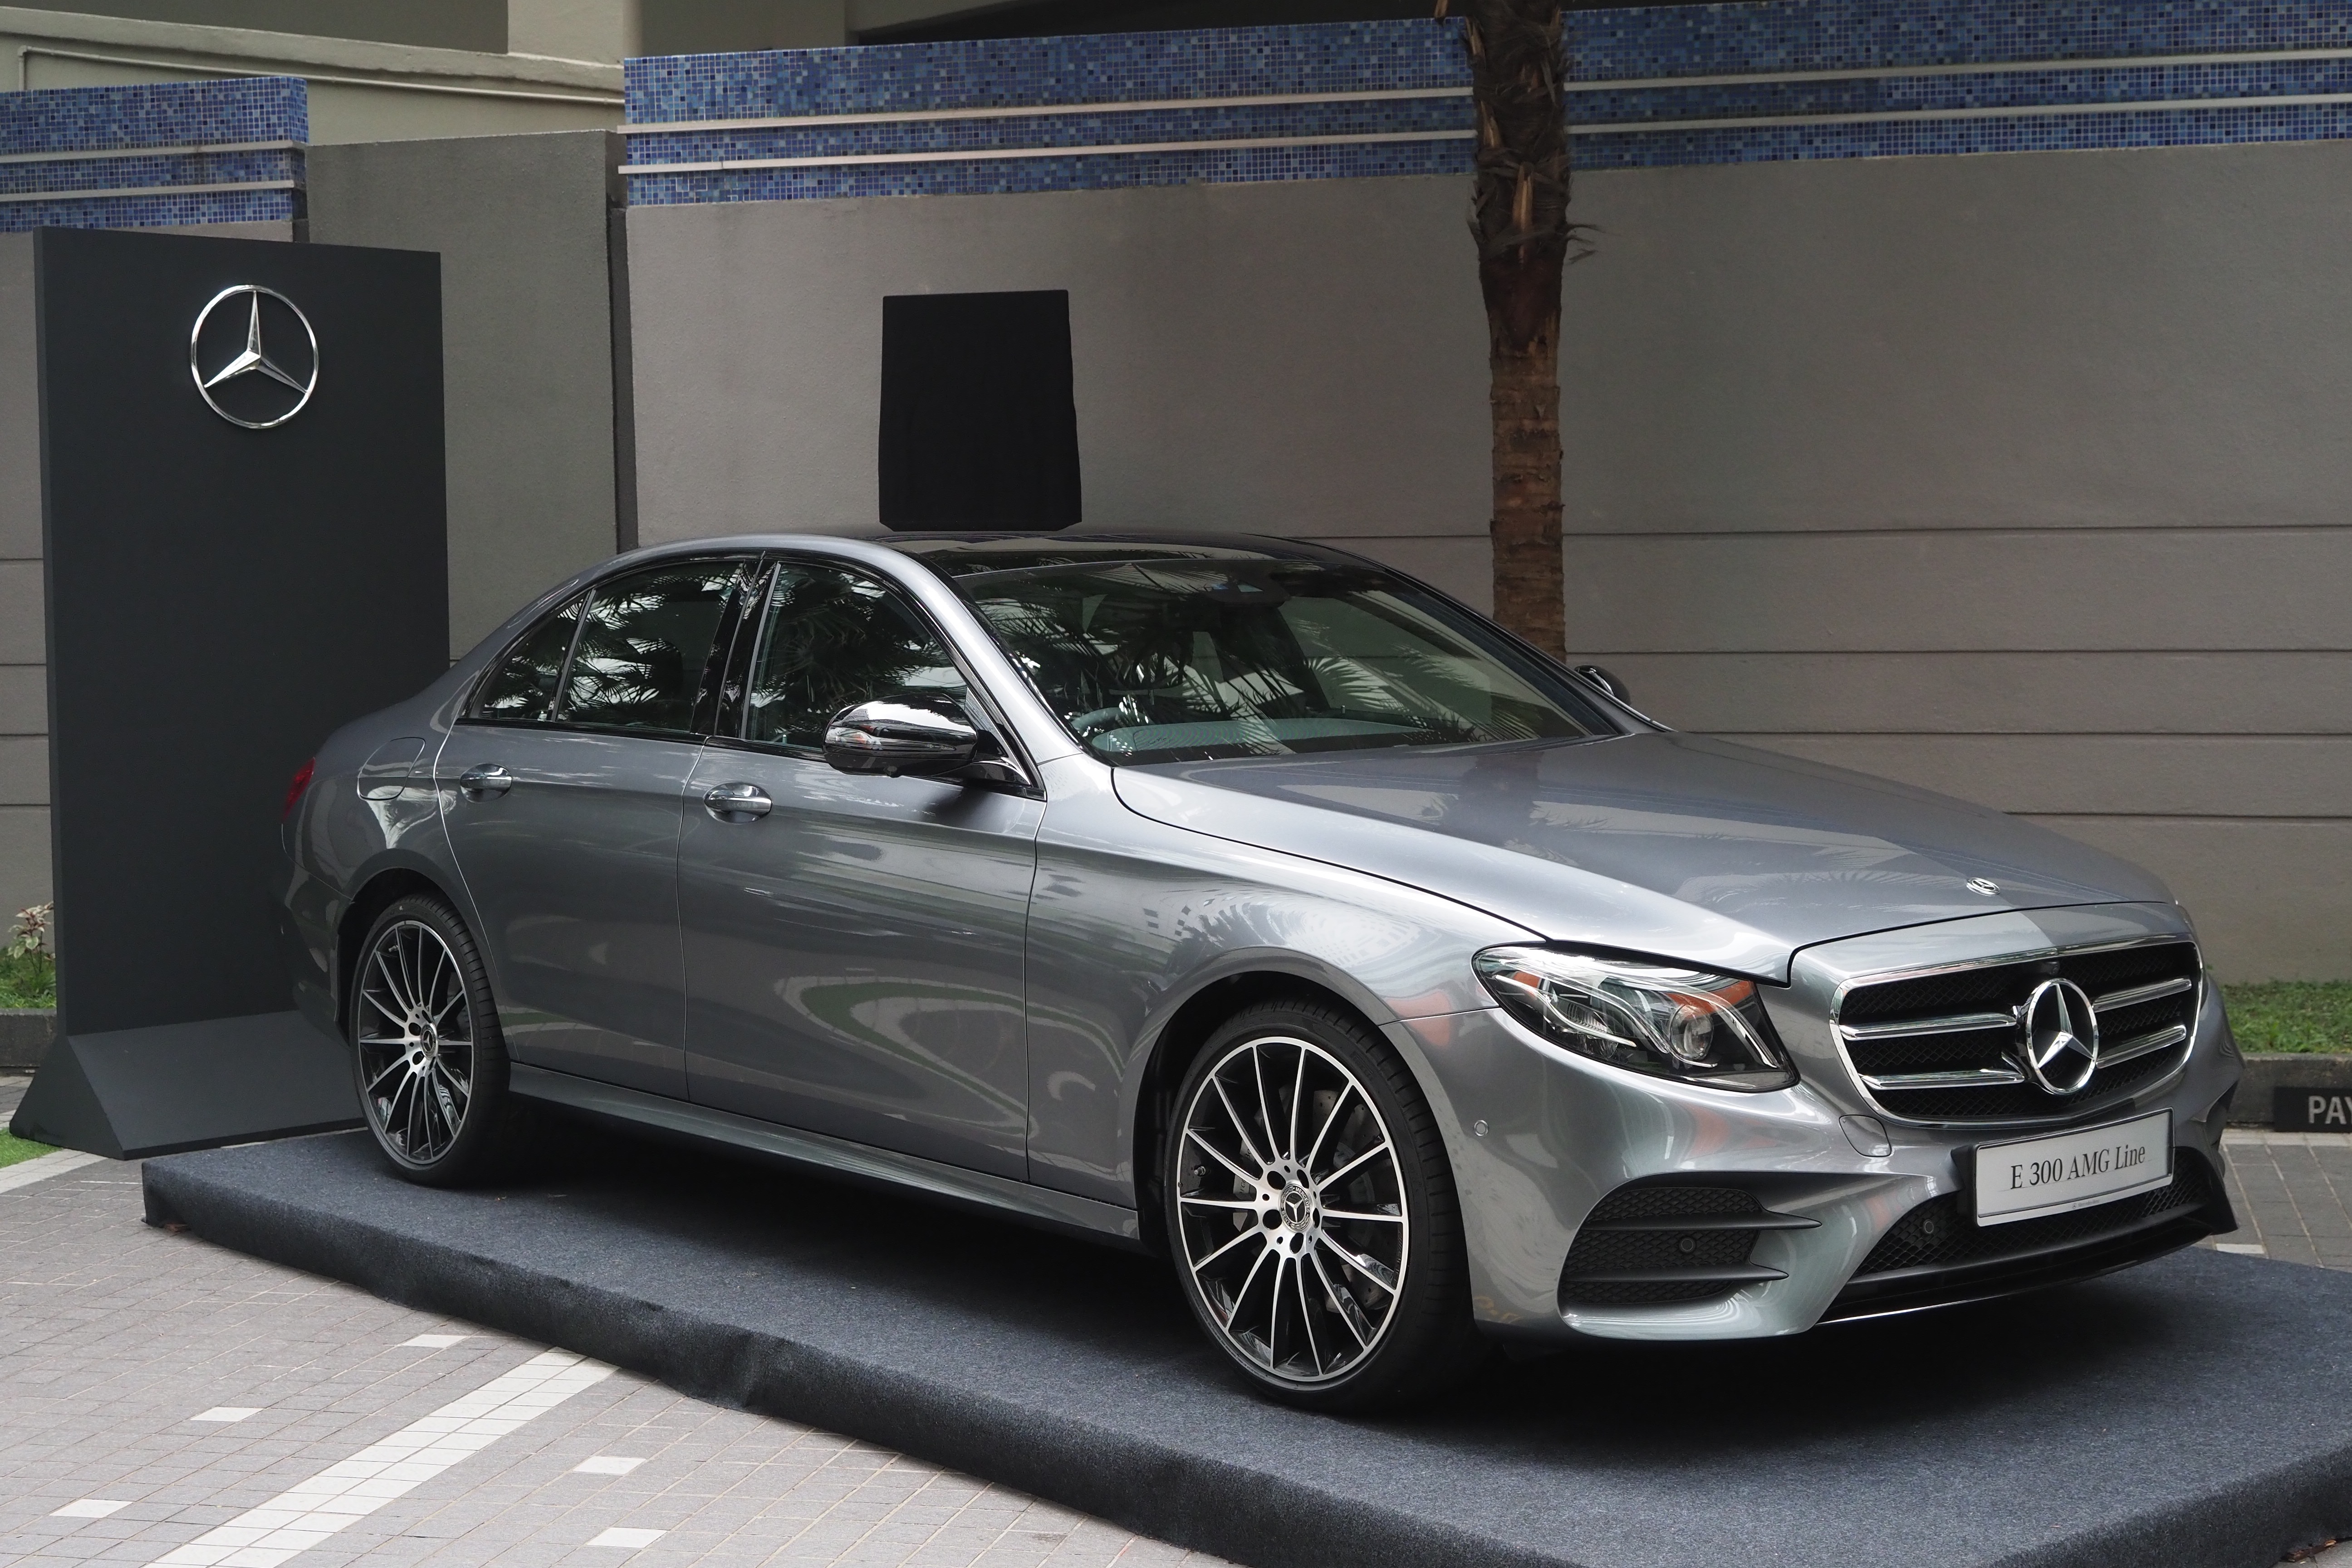 Mercedes Benz Malaysia Introduces E300 Amg Line To Lead The E Class Charge News And Reviews On Malaysian Cars Motorcycles And Automotive Lifestyle